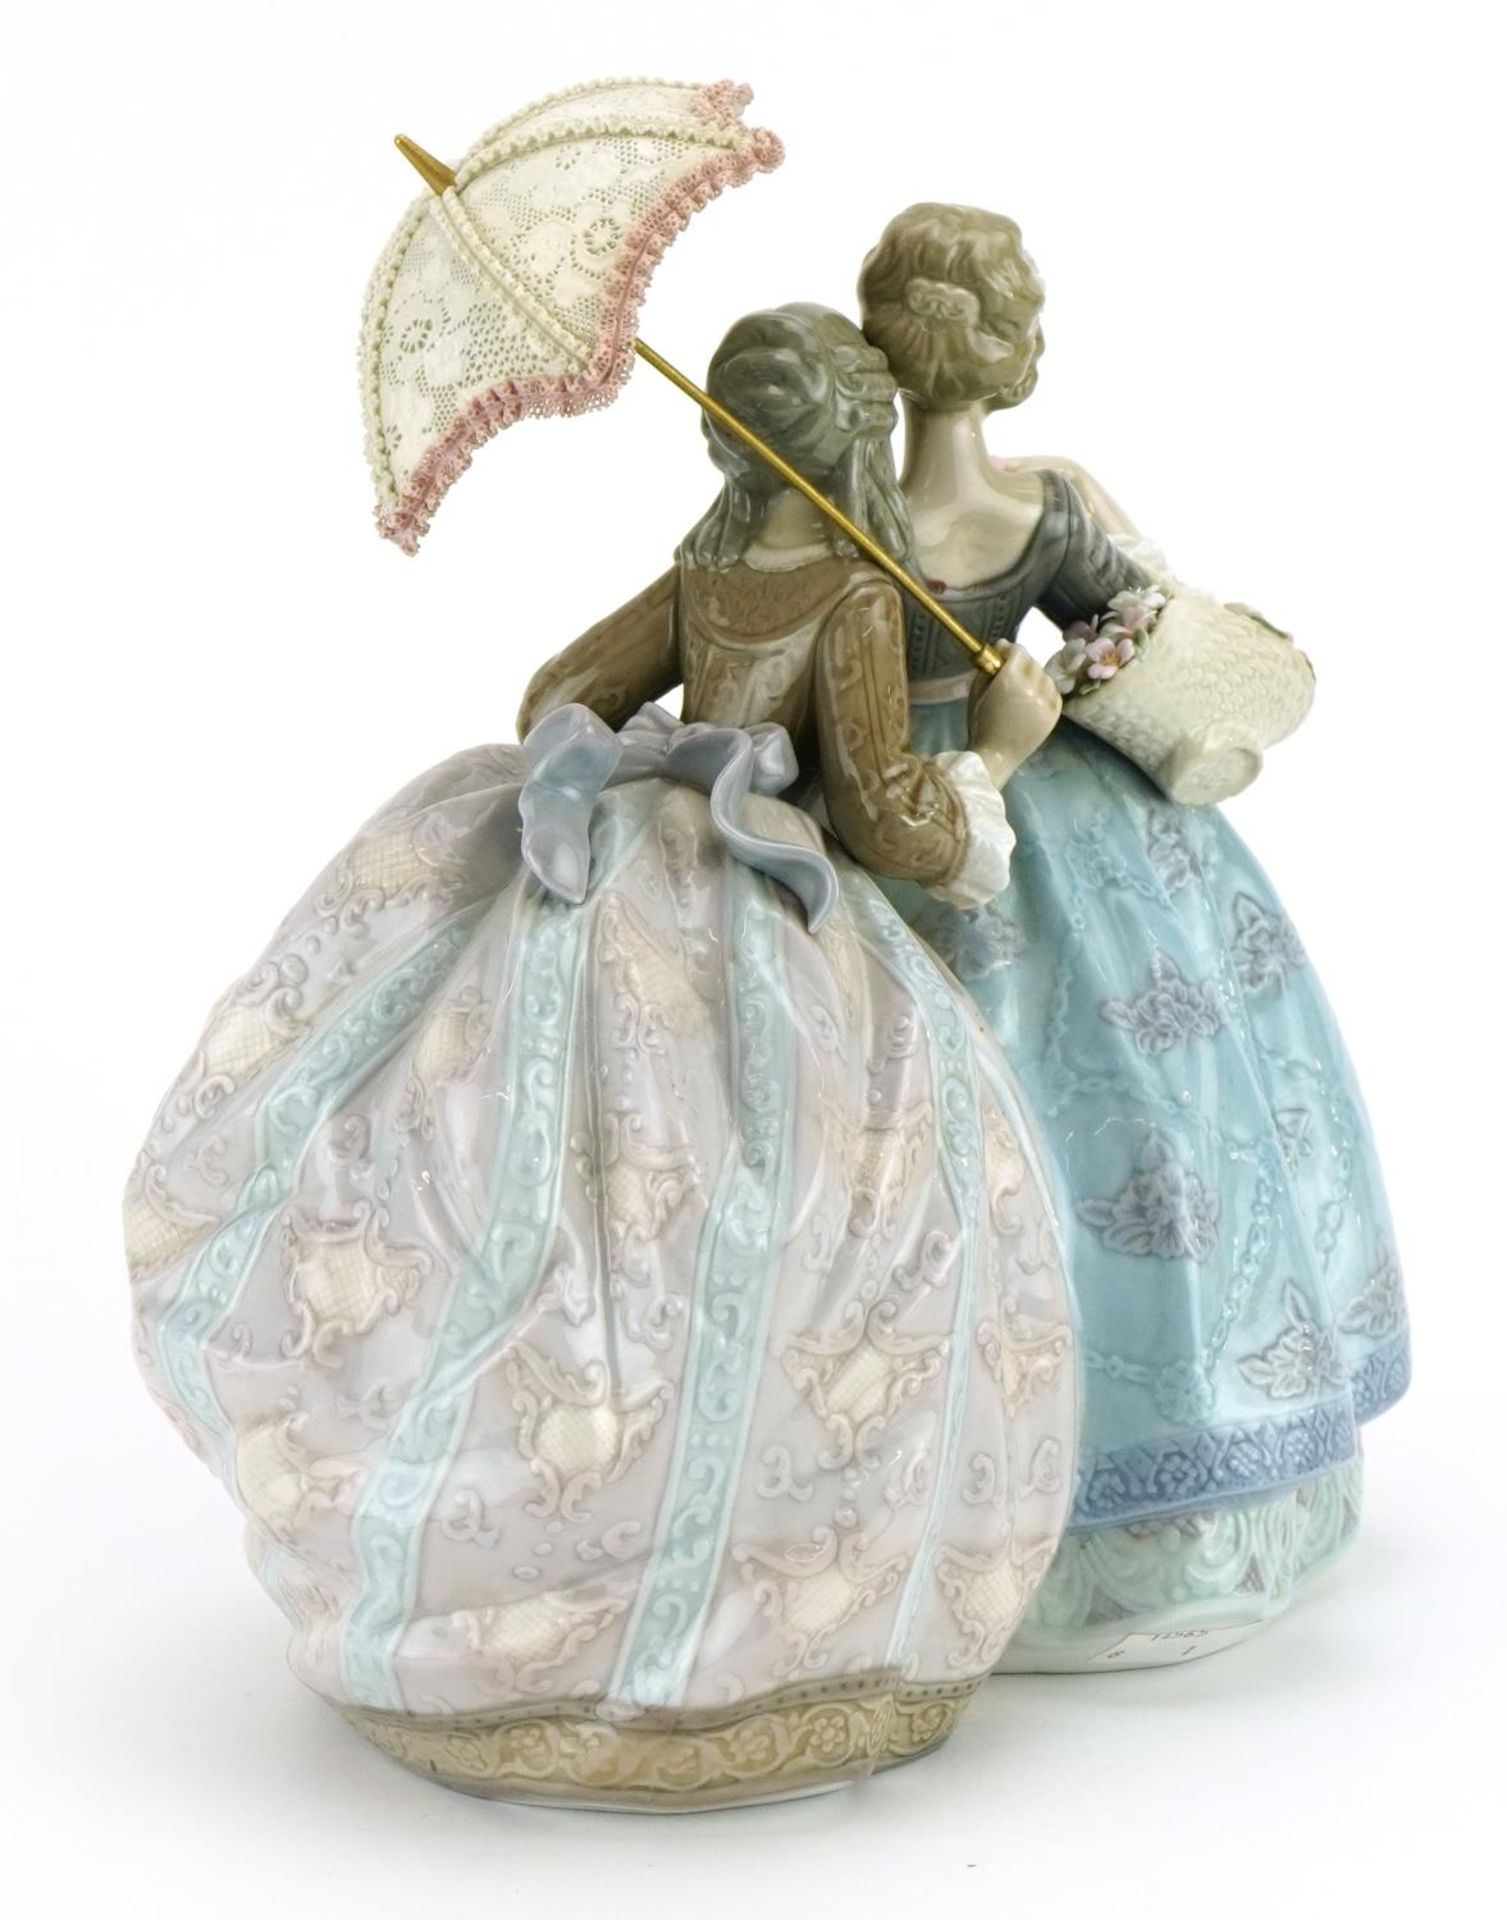 Lladro Southern Charm figure group, 27cm high - Image 2 of 4